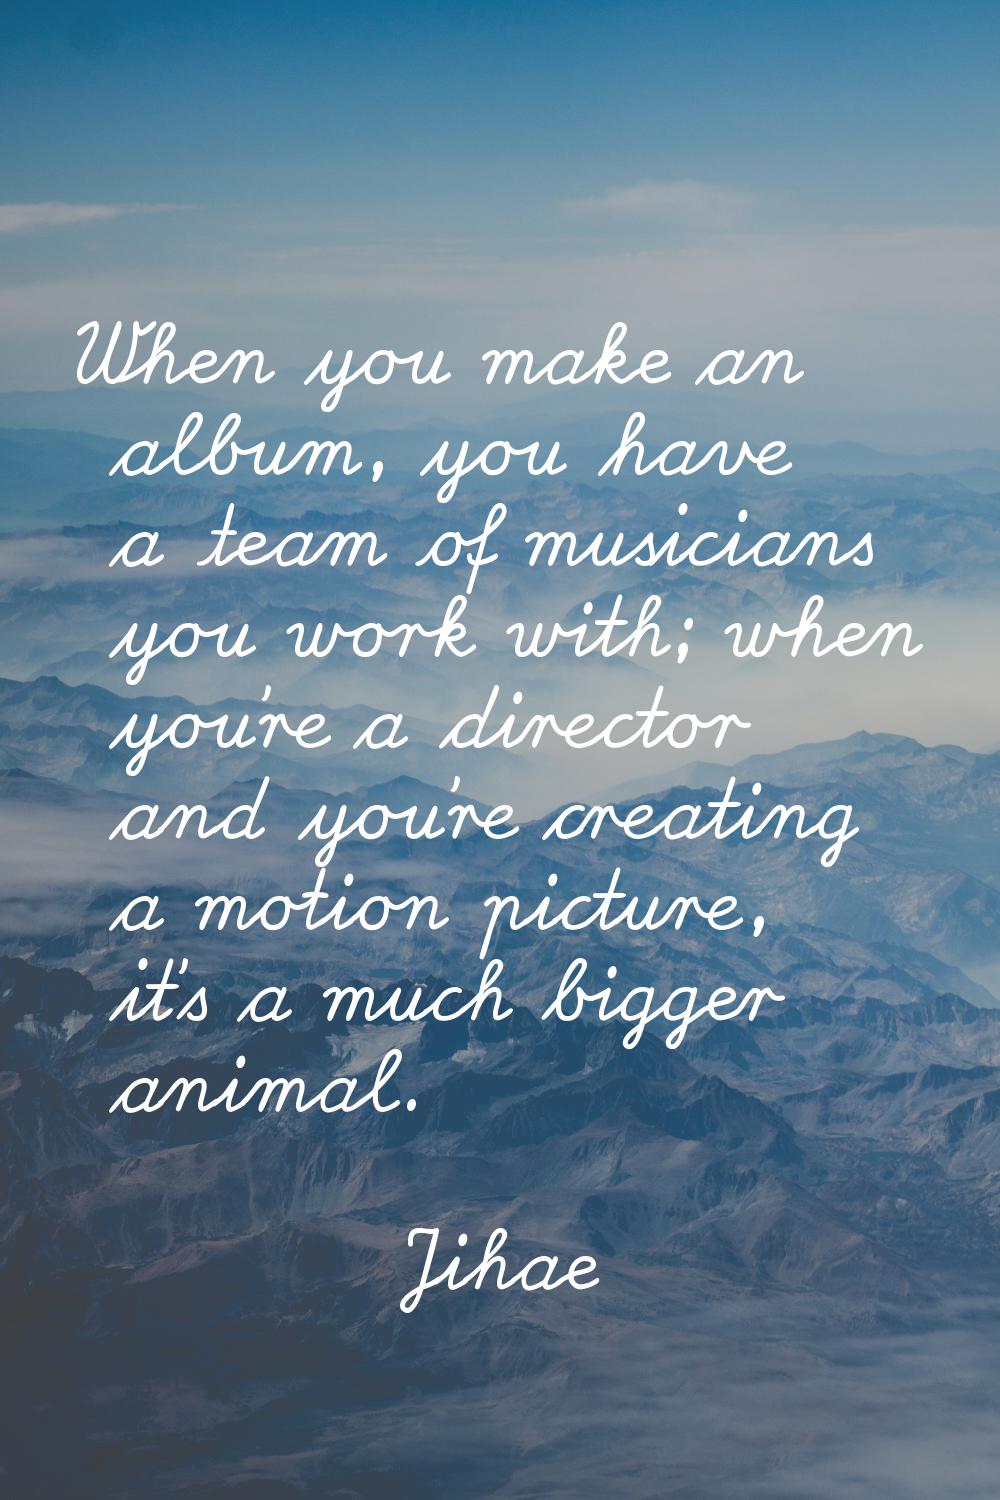 When you make an album, you have a team of musicians you work with; when you're a director and you'